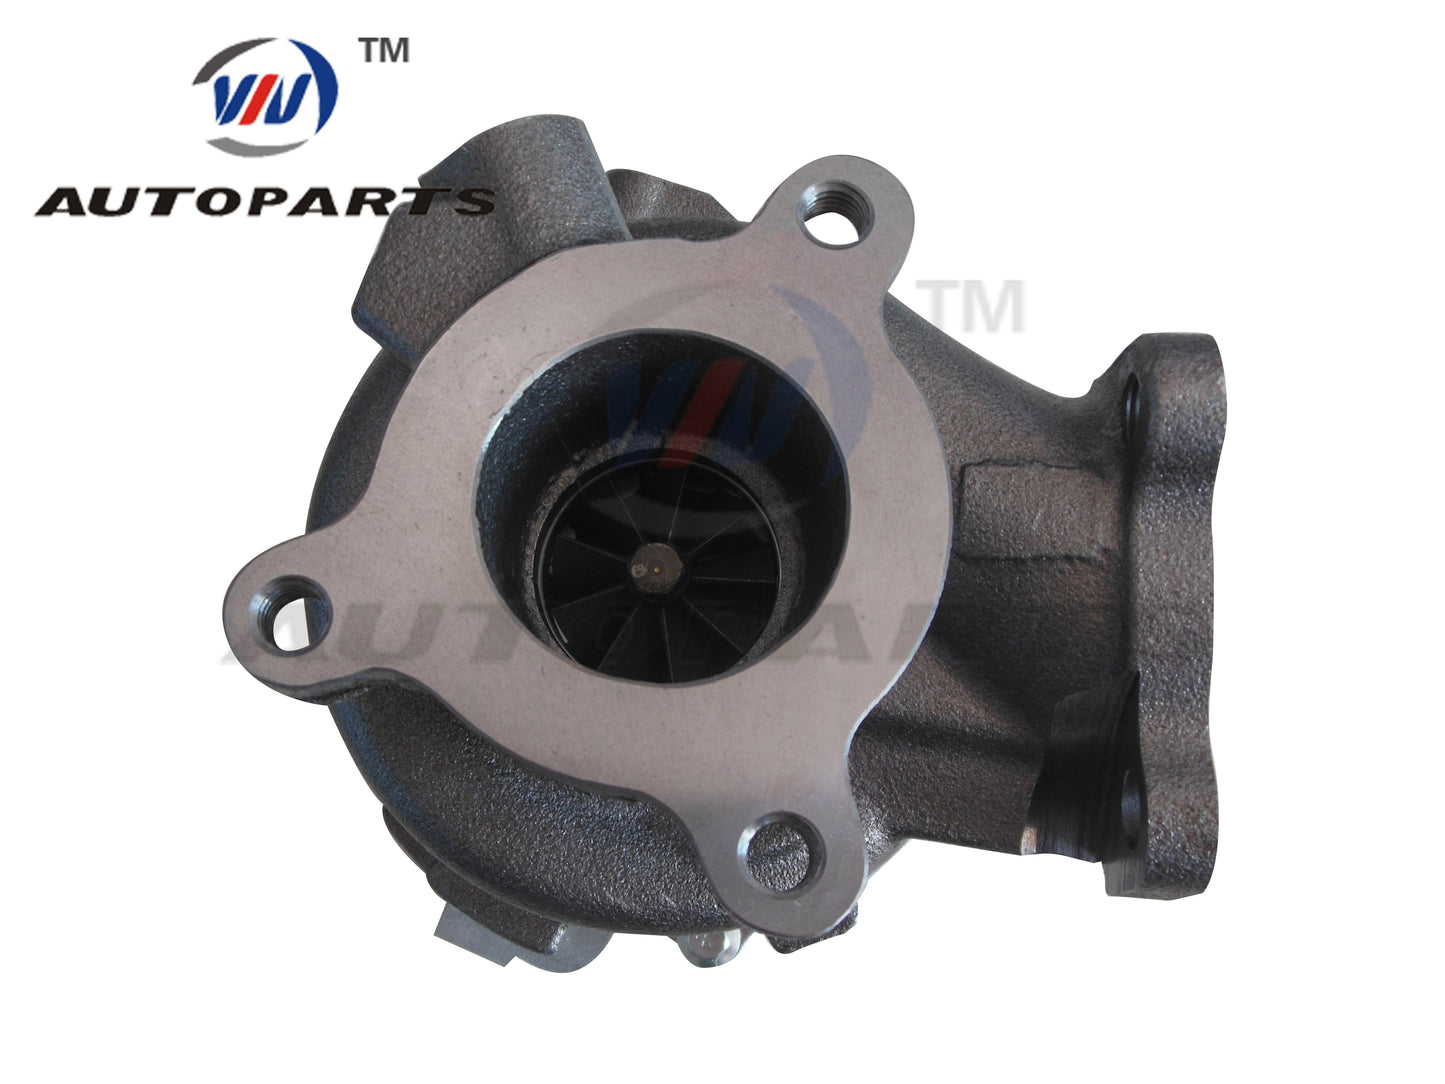 Turbocharger 775095-5001S for Toyota Land Cruiser 70 Series with 1VD-FTV EURO IV 4.5L Diesel Engine